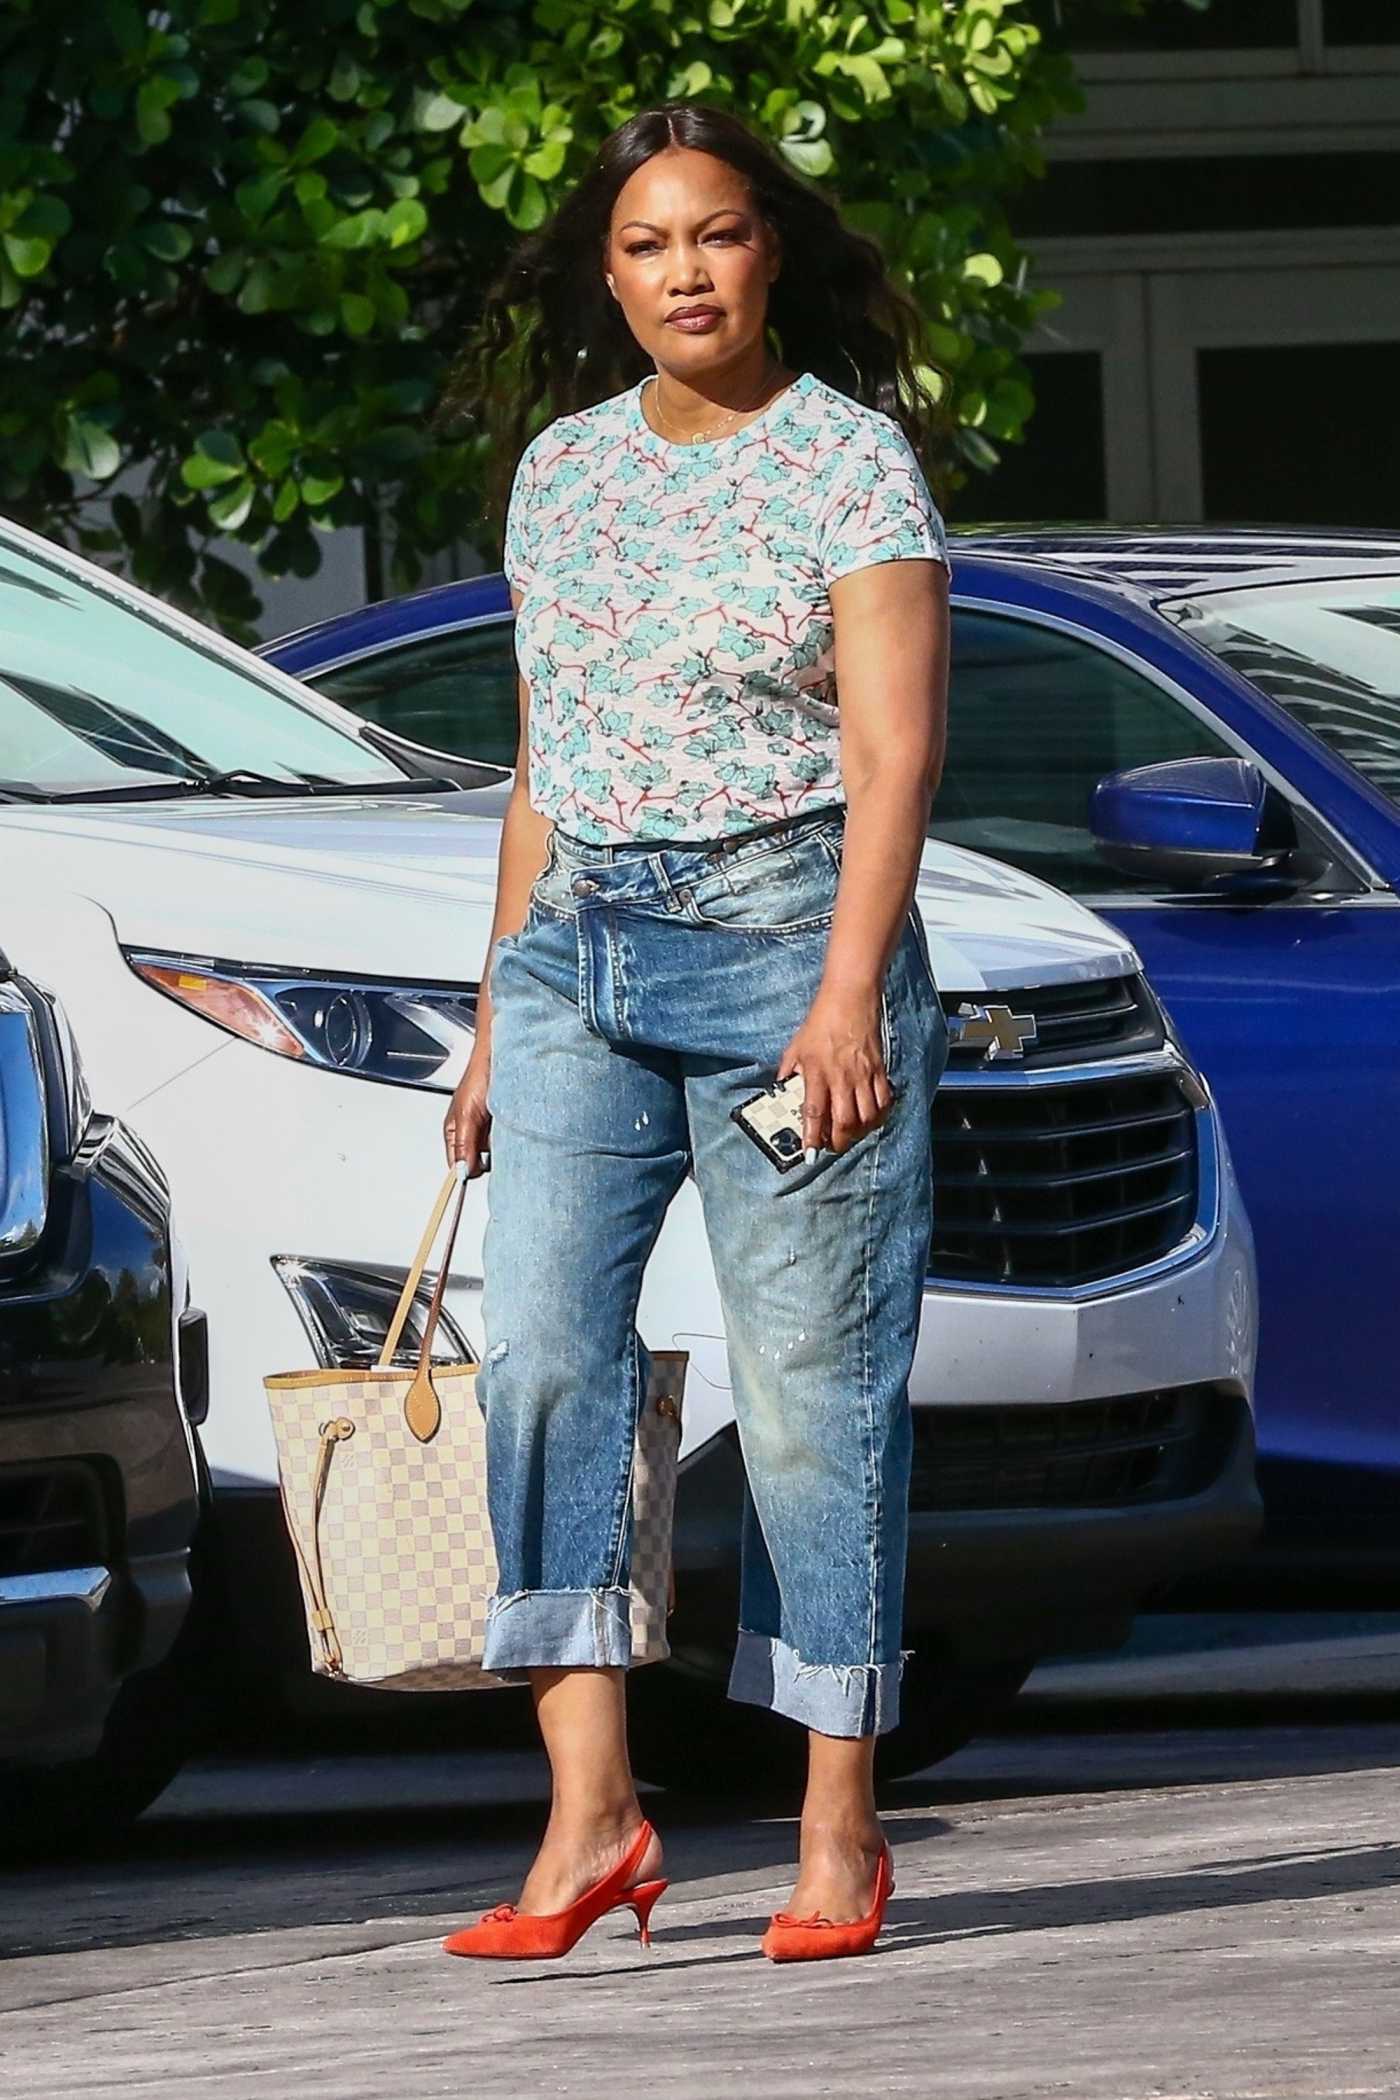 Garcelle Beauvais in a Floral Tee Leaves Her Hotel in Miami 07/16/2021